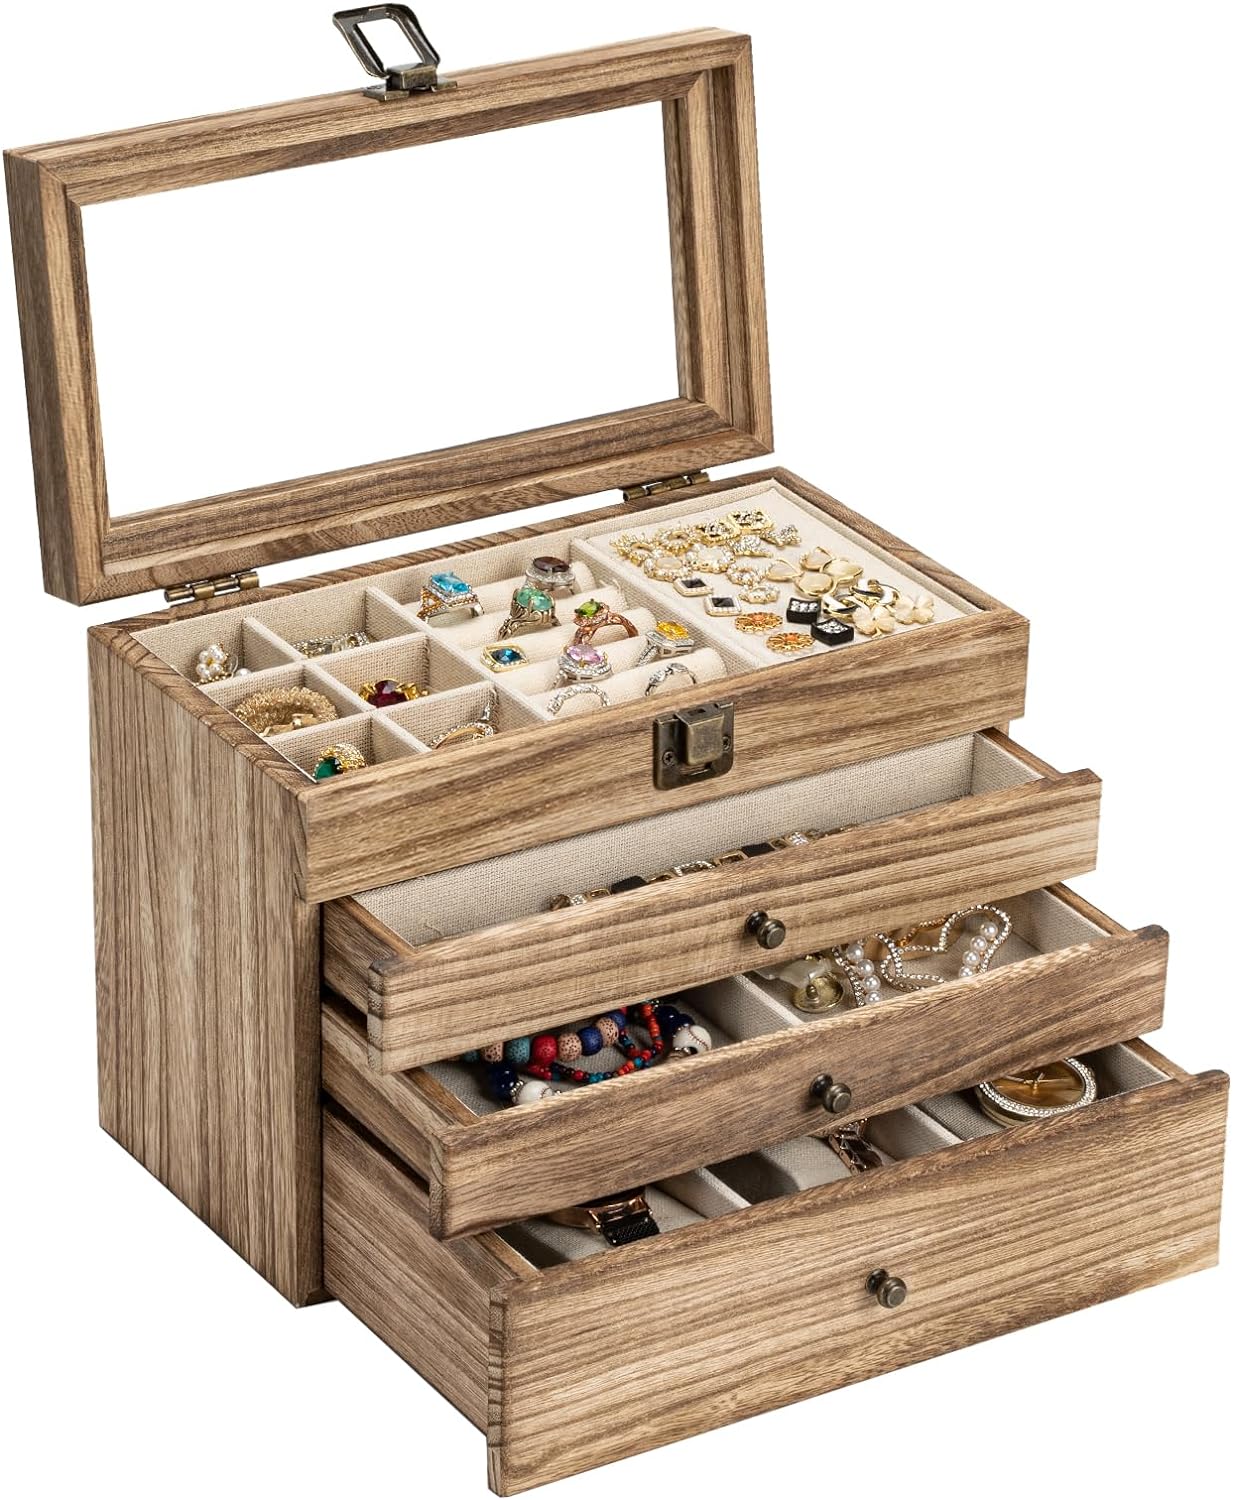 Yoimori Jewelry Box for Women, 4-Layer Jewelry Boxes  Organizers for Storage Necklaces Rings Earrings Bracelets Watches, Farmhouse Style Wood Jewelry Boxes with Glass Lid (Torched Wood Color)